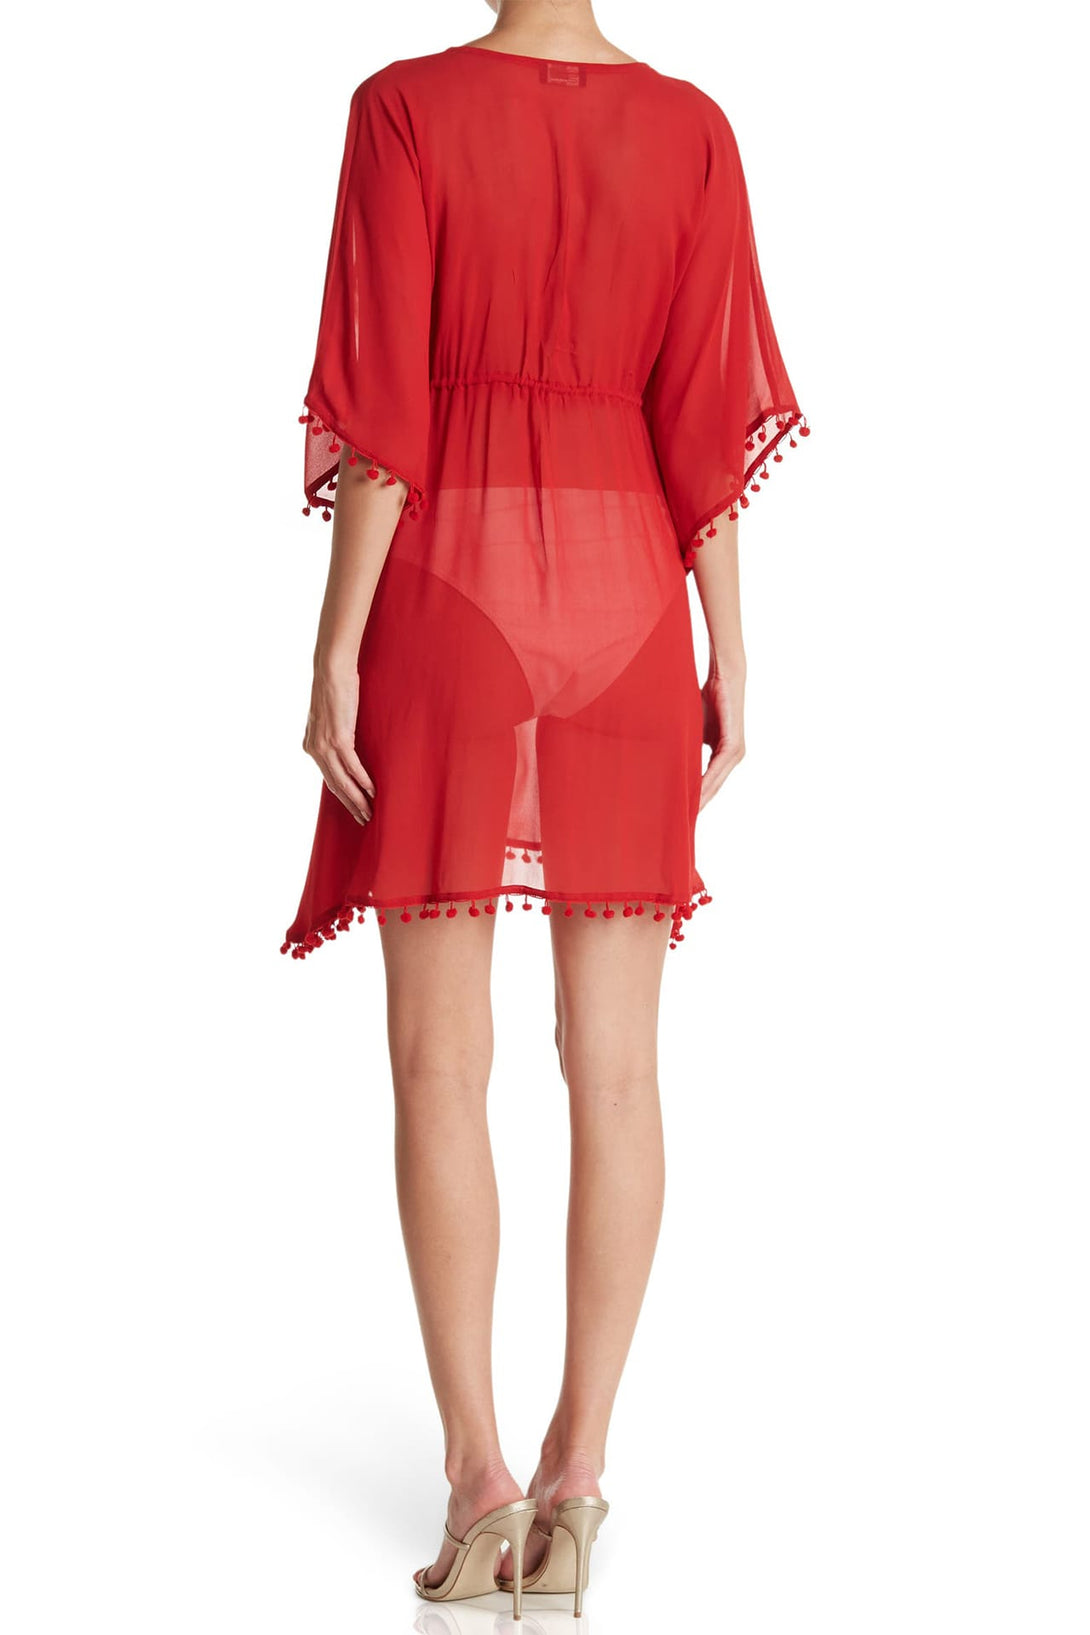 "red swimsuit cover up" "sexy beach cover ups" "Shahida Parides" "best swim cover ups"